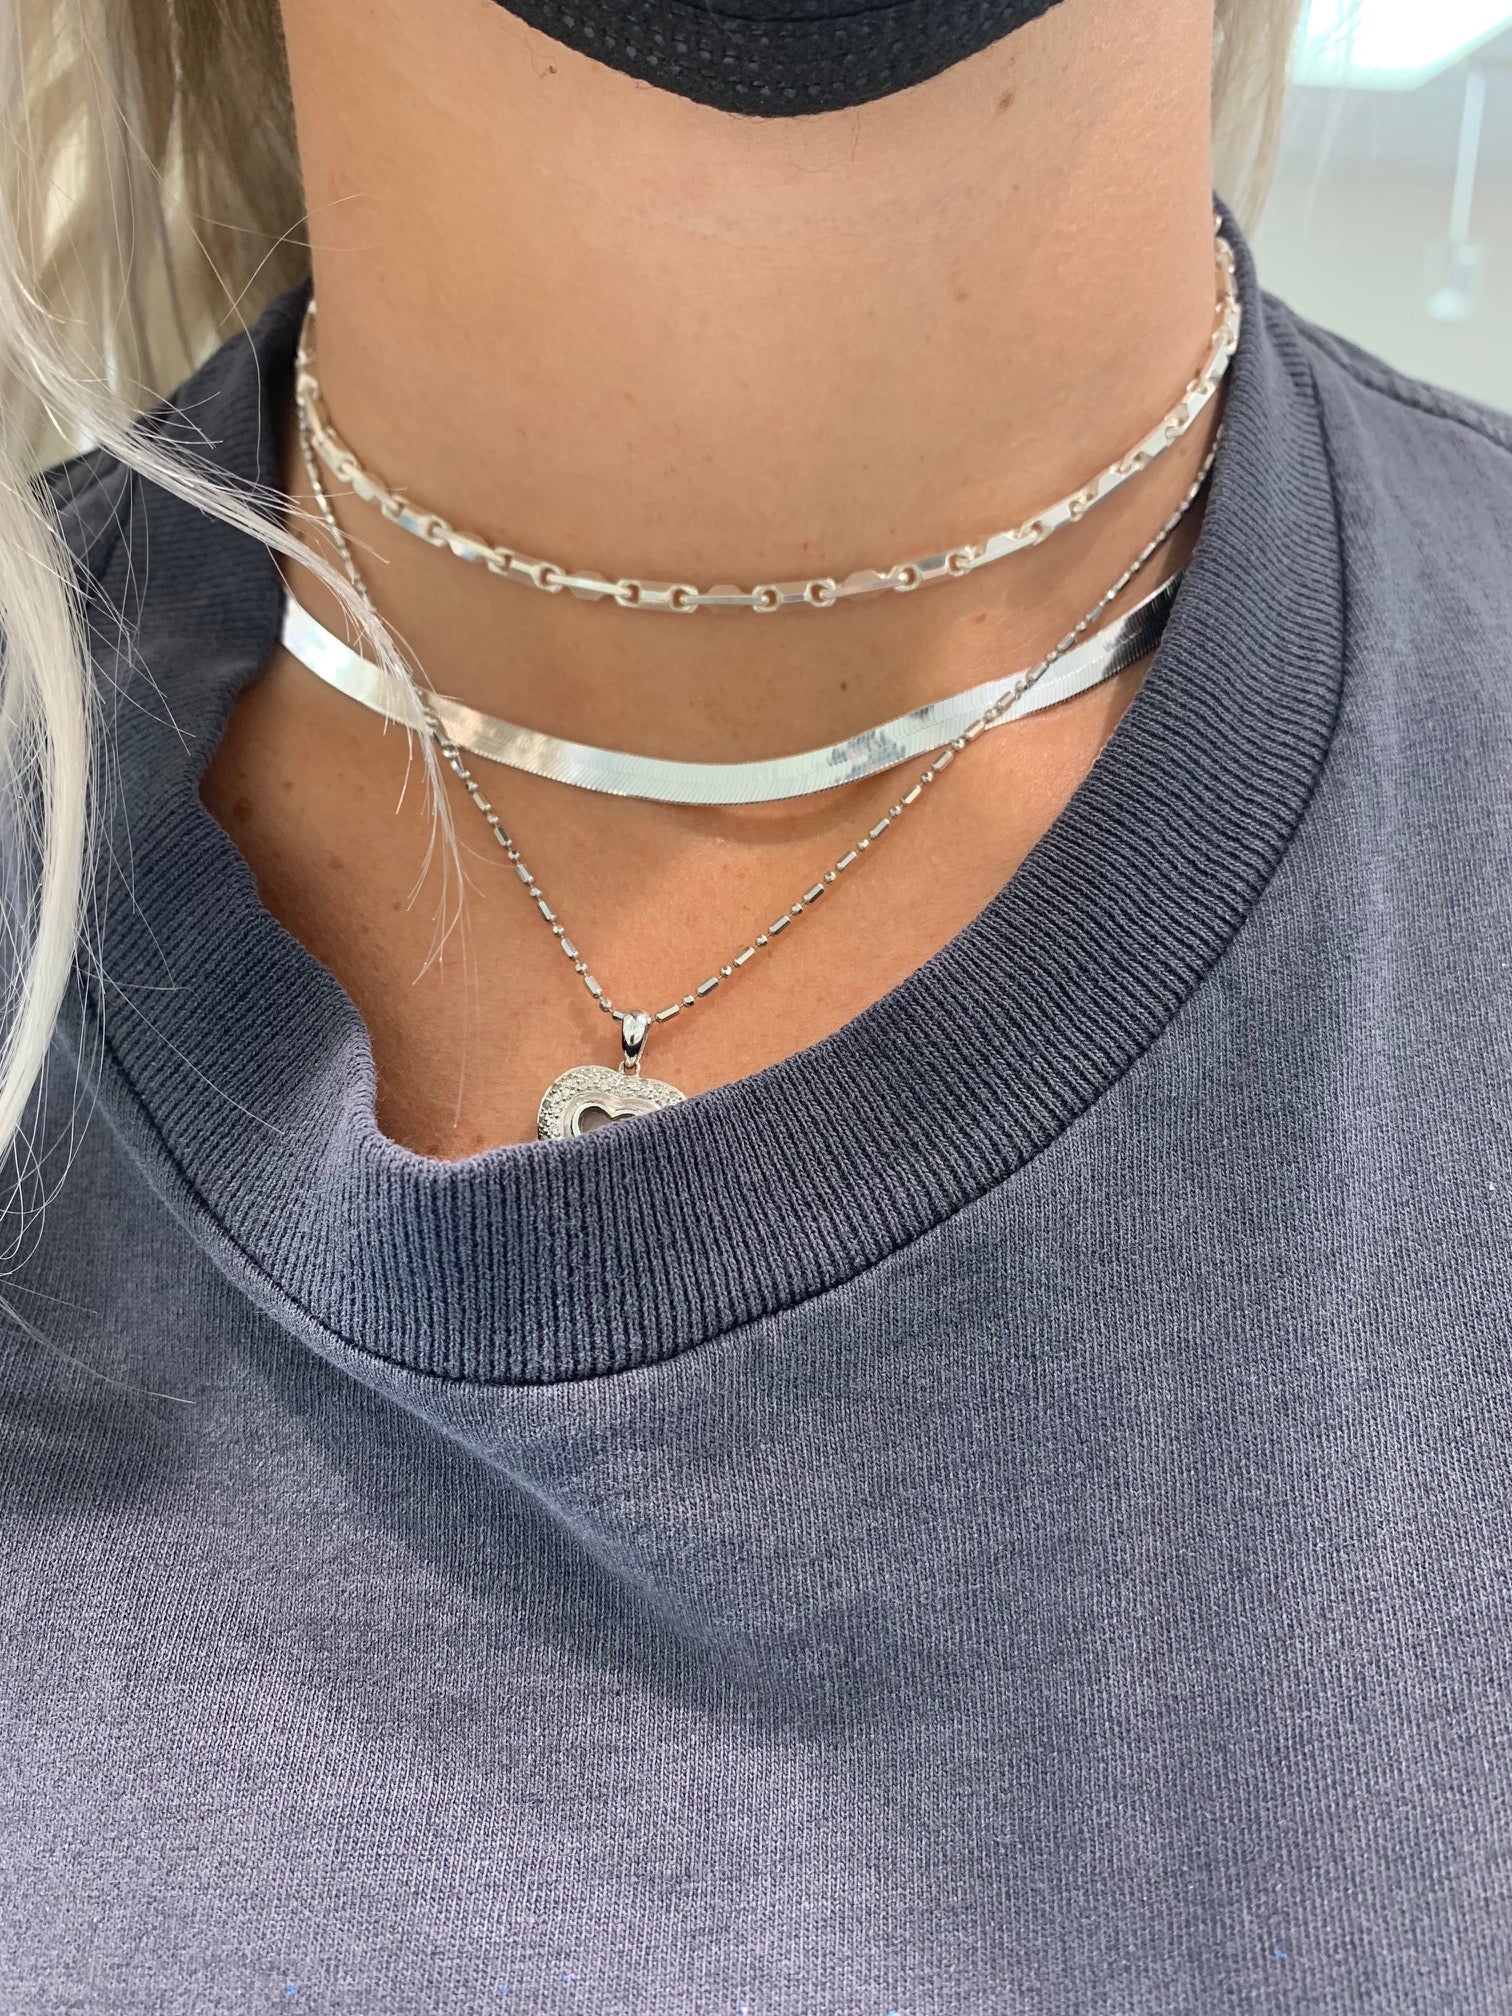 Top 7 Silver Herringbone Necklaces You Will Love | Classy Women Collection